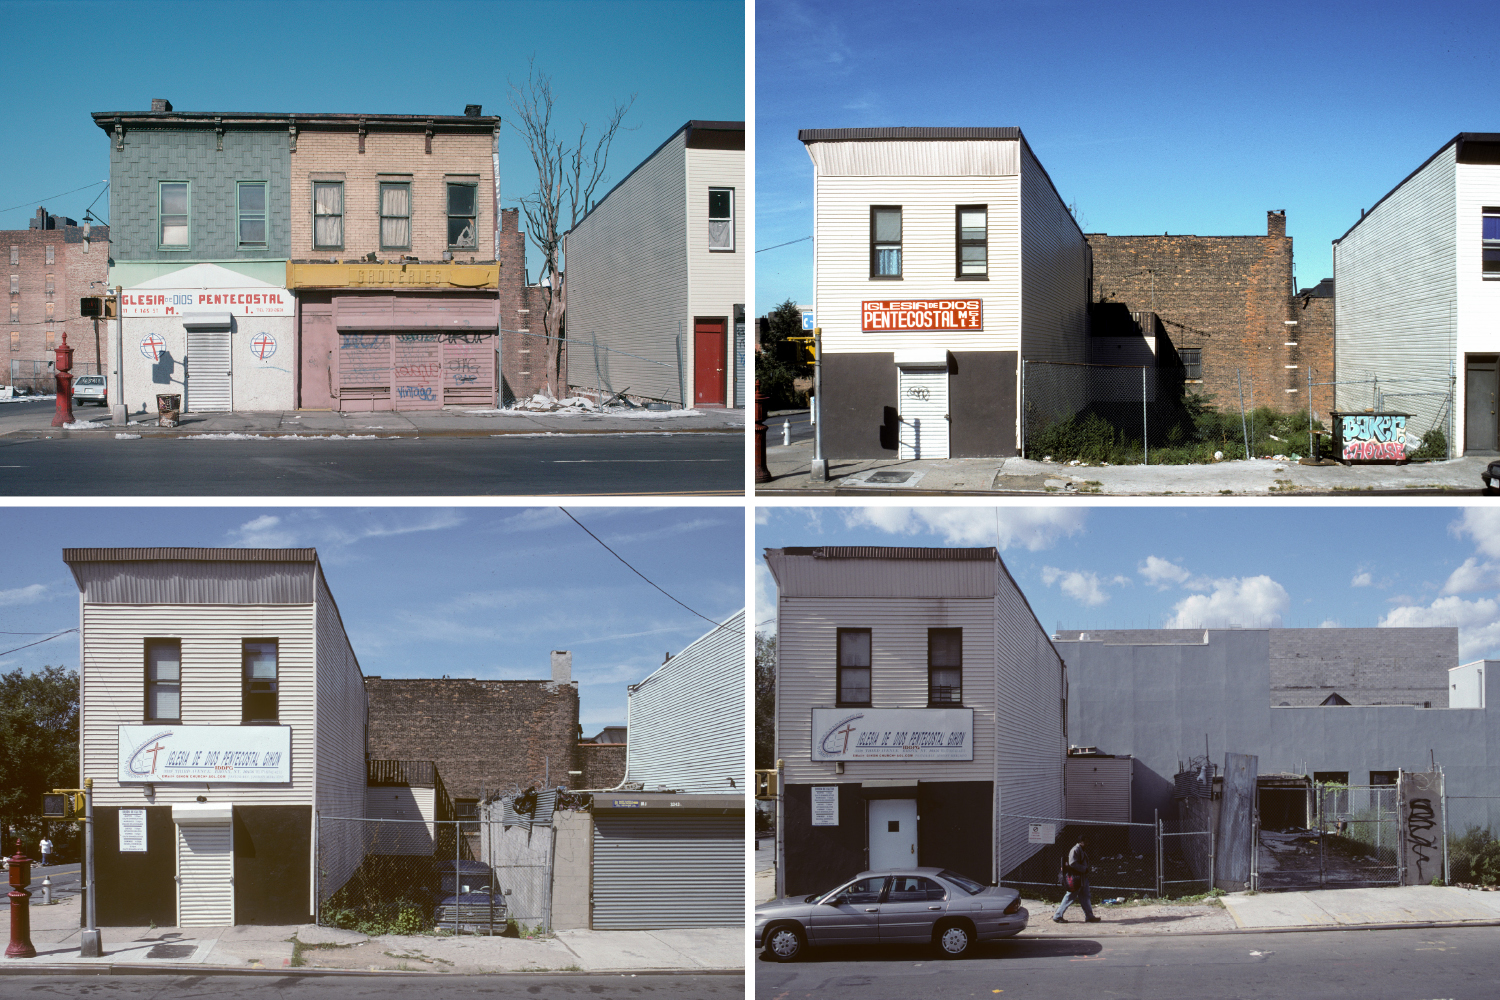 From top left: 3344 Third Ave., S. Bronx, N.Y., 1990; 3339 Third Ave., S. Bronx, N.Y., 1994; 3339 Third Ave., S. Bronx, N.Y., 2003; 3339 Third Ave., S. Bronx, N.Y., 2006.